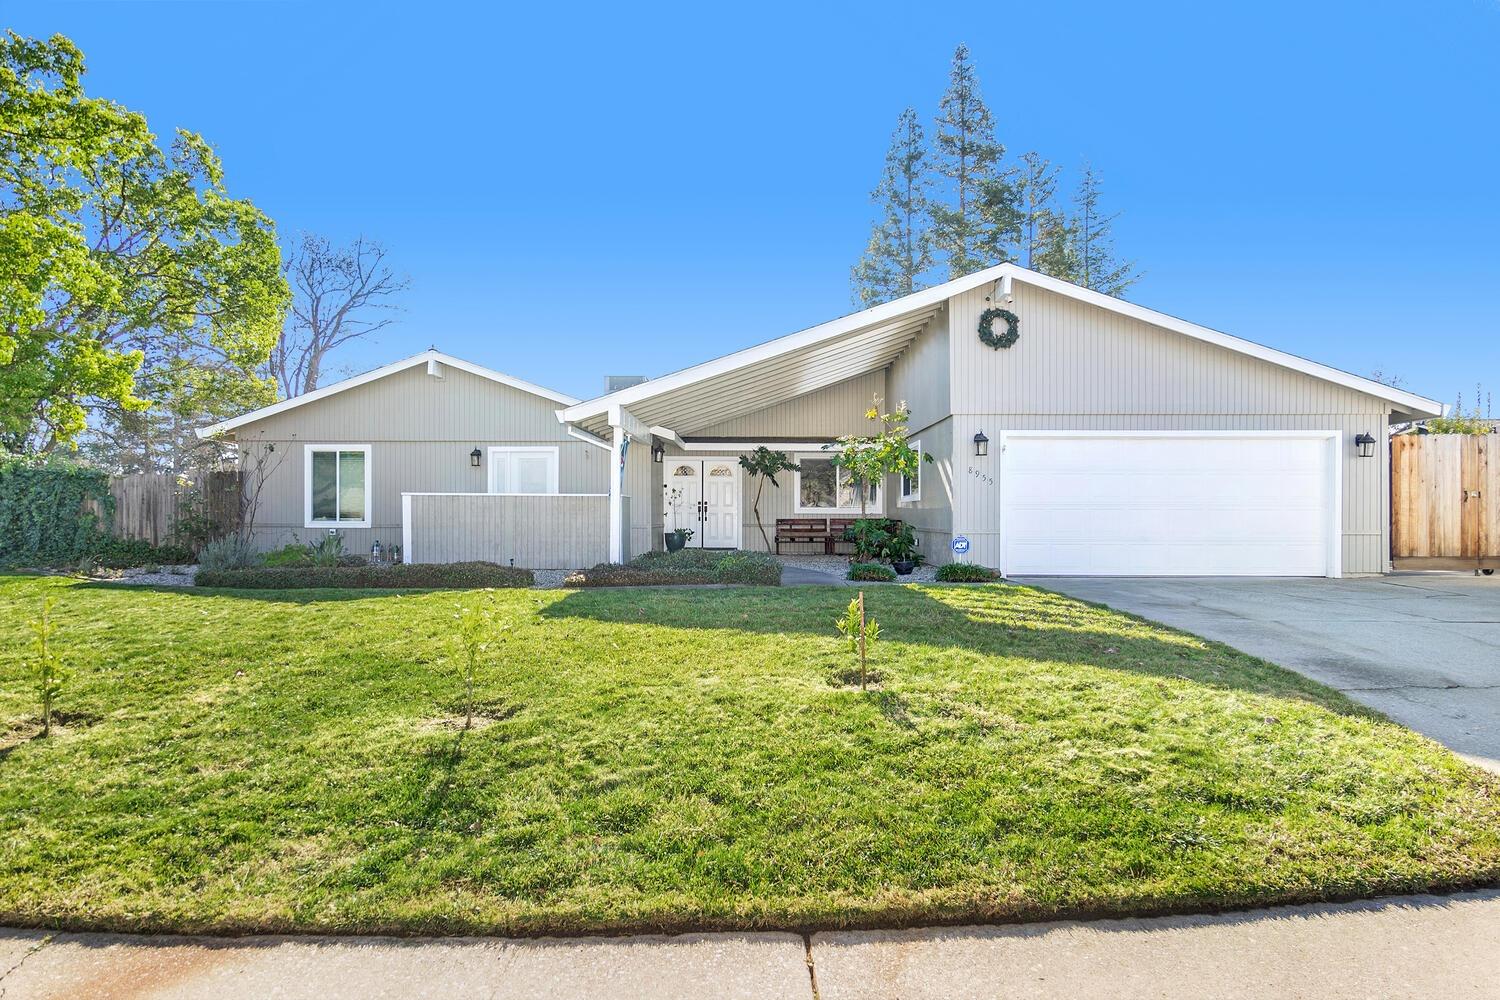 You are going to love this beautiful, open & bright home! Recently updated throughout including a go